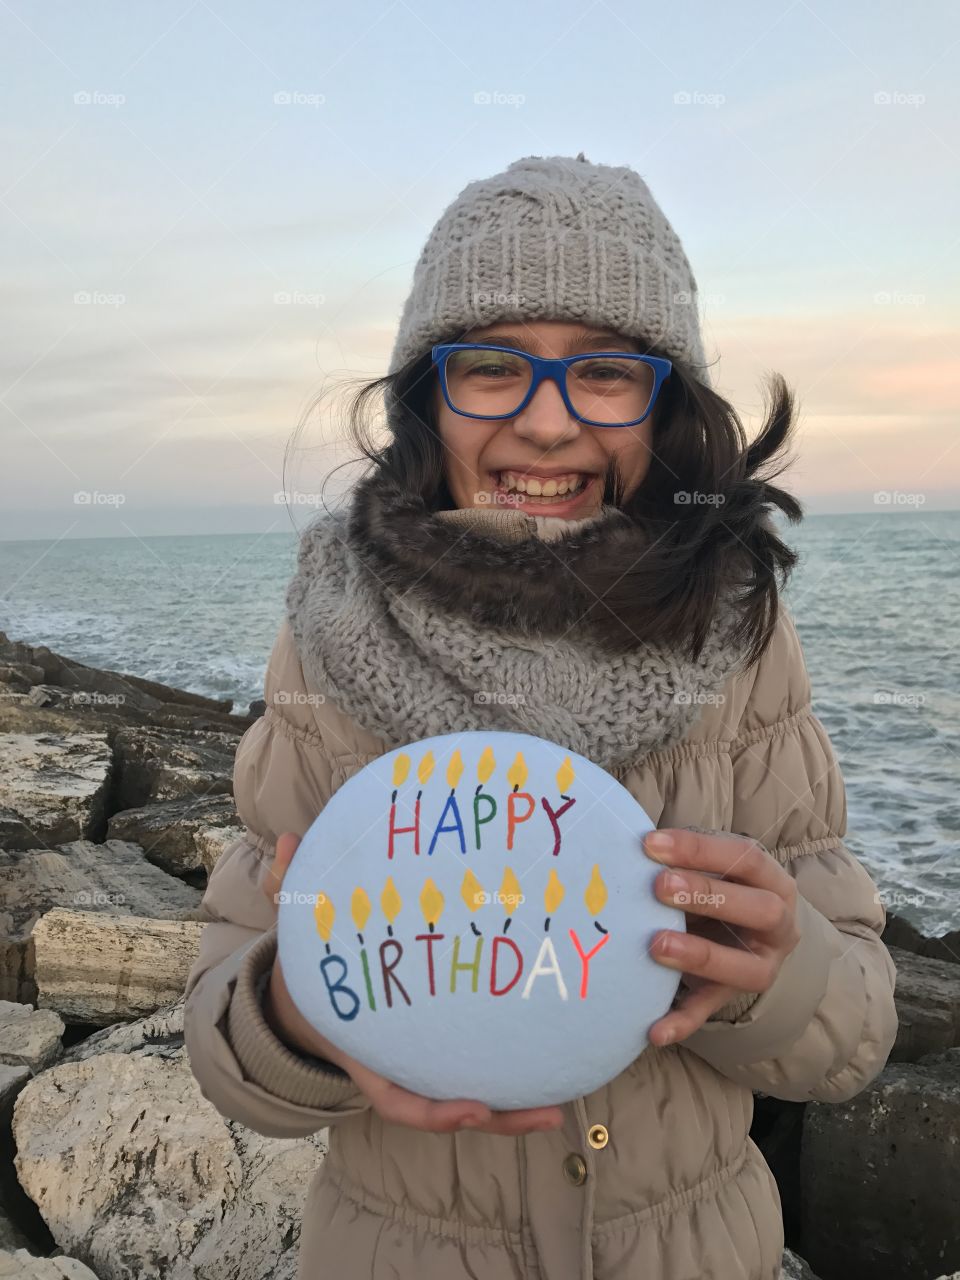 Girl holding balloon with happy birthday text